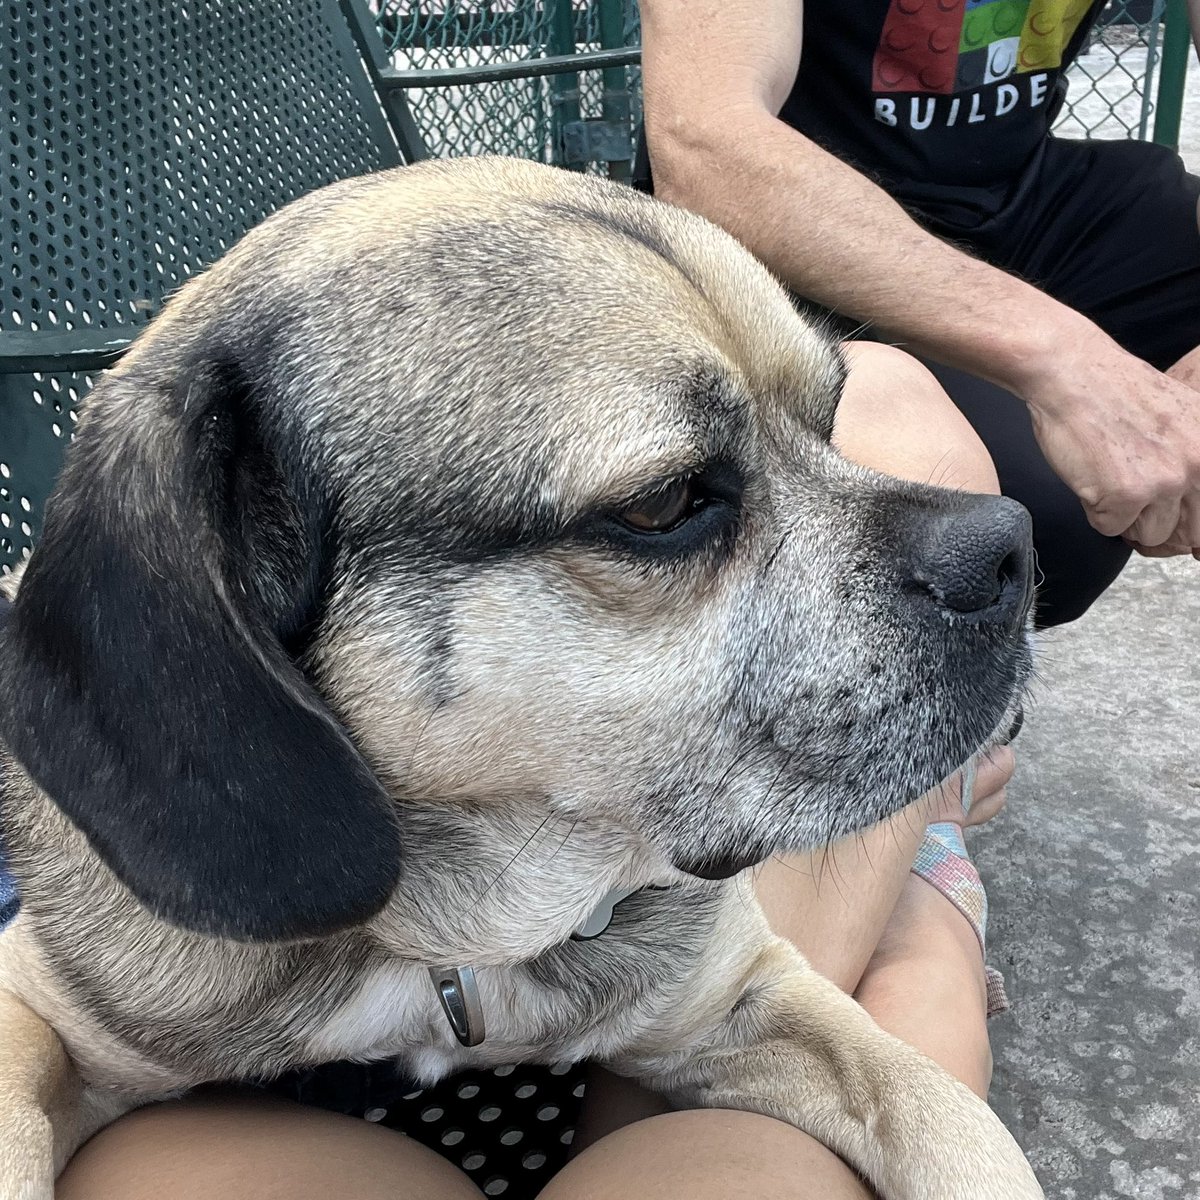 Staycation means the boys get 2 hours at the dog park. #pugglebrothers #thepuggleisreal #miamibeachpuggles #internlife